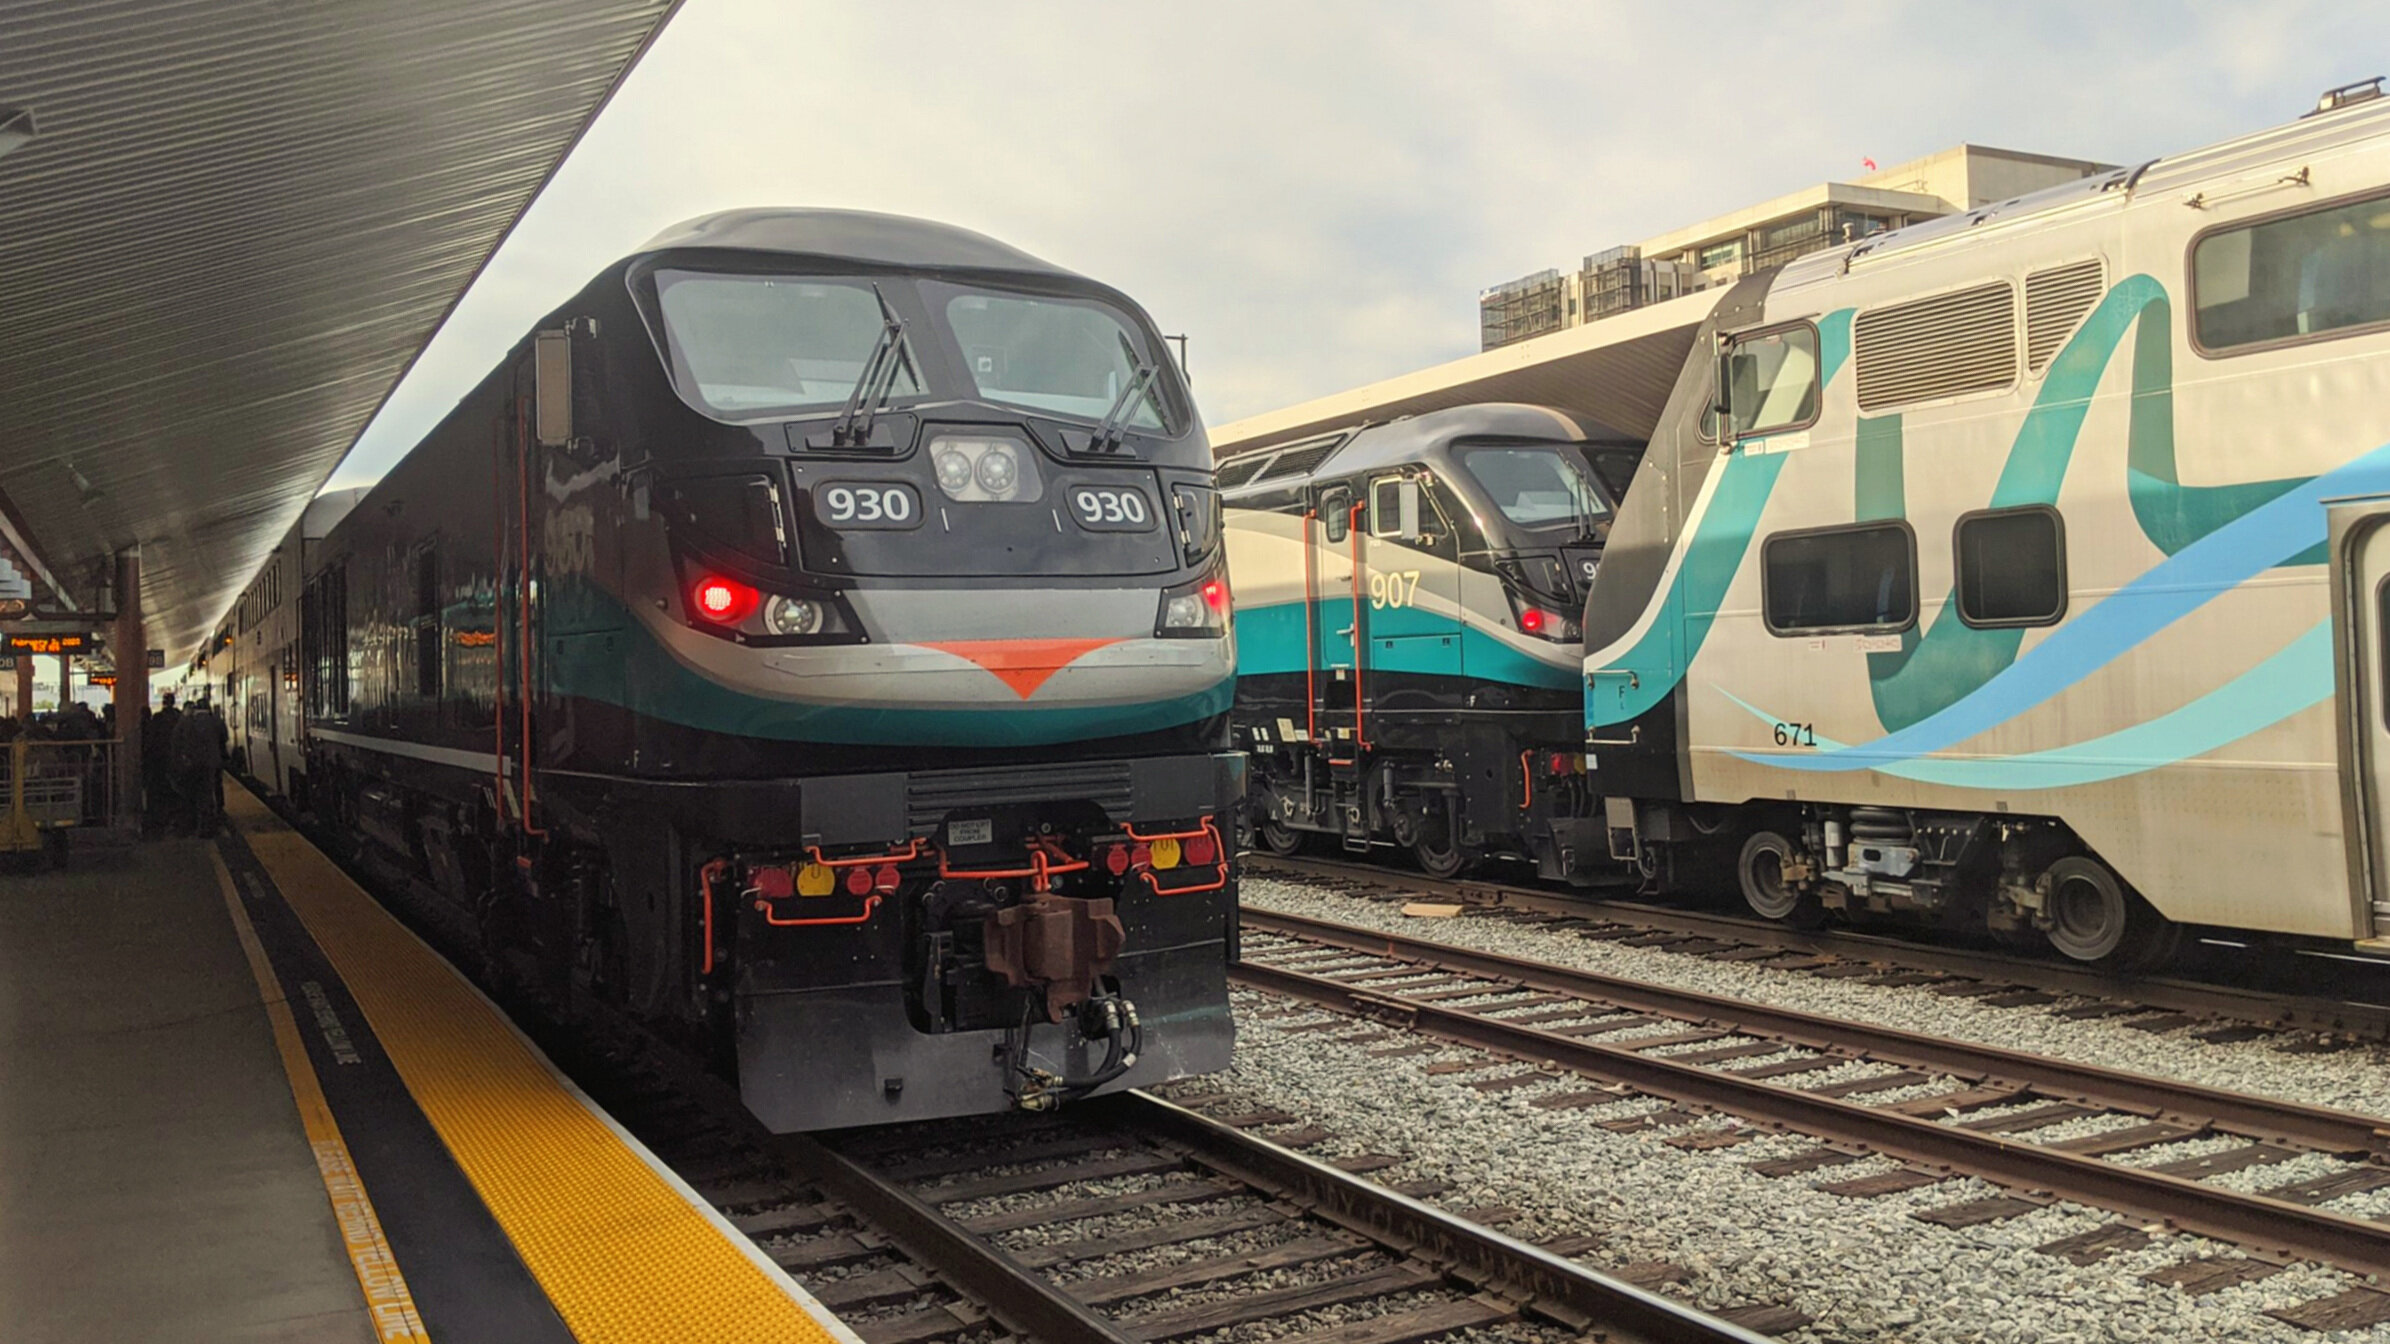  Two new F125 “Spirit” class locomotives at Los Angeles Union Station. Photo by Alex Lewis, 2020. 